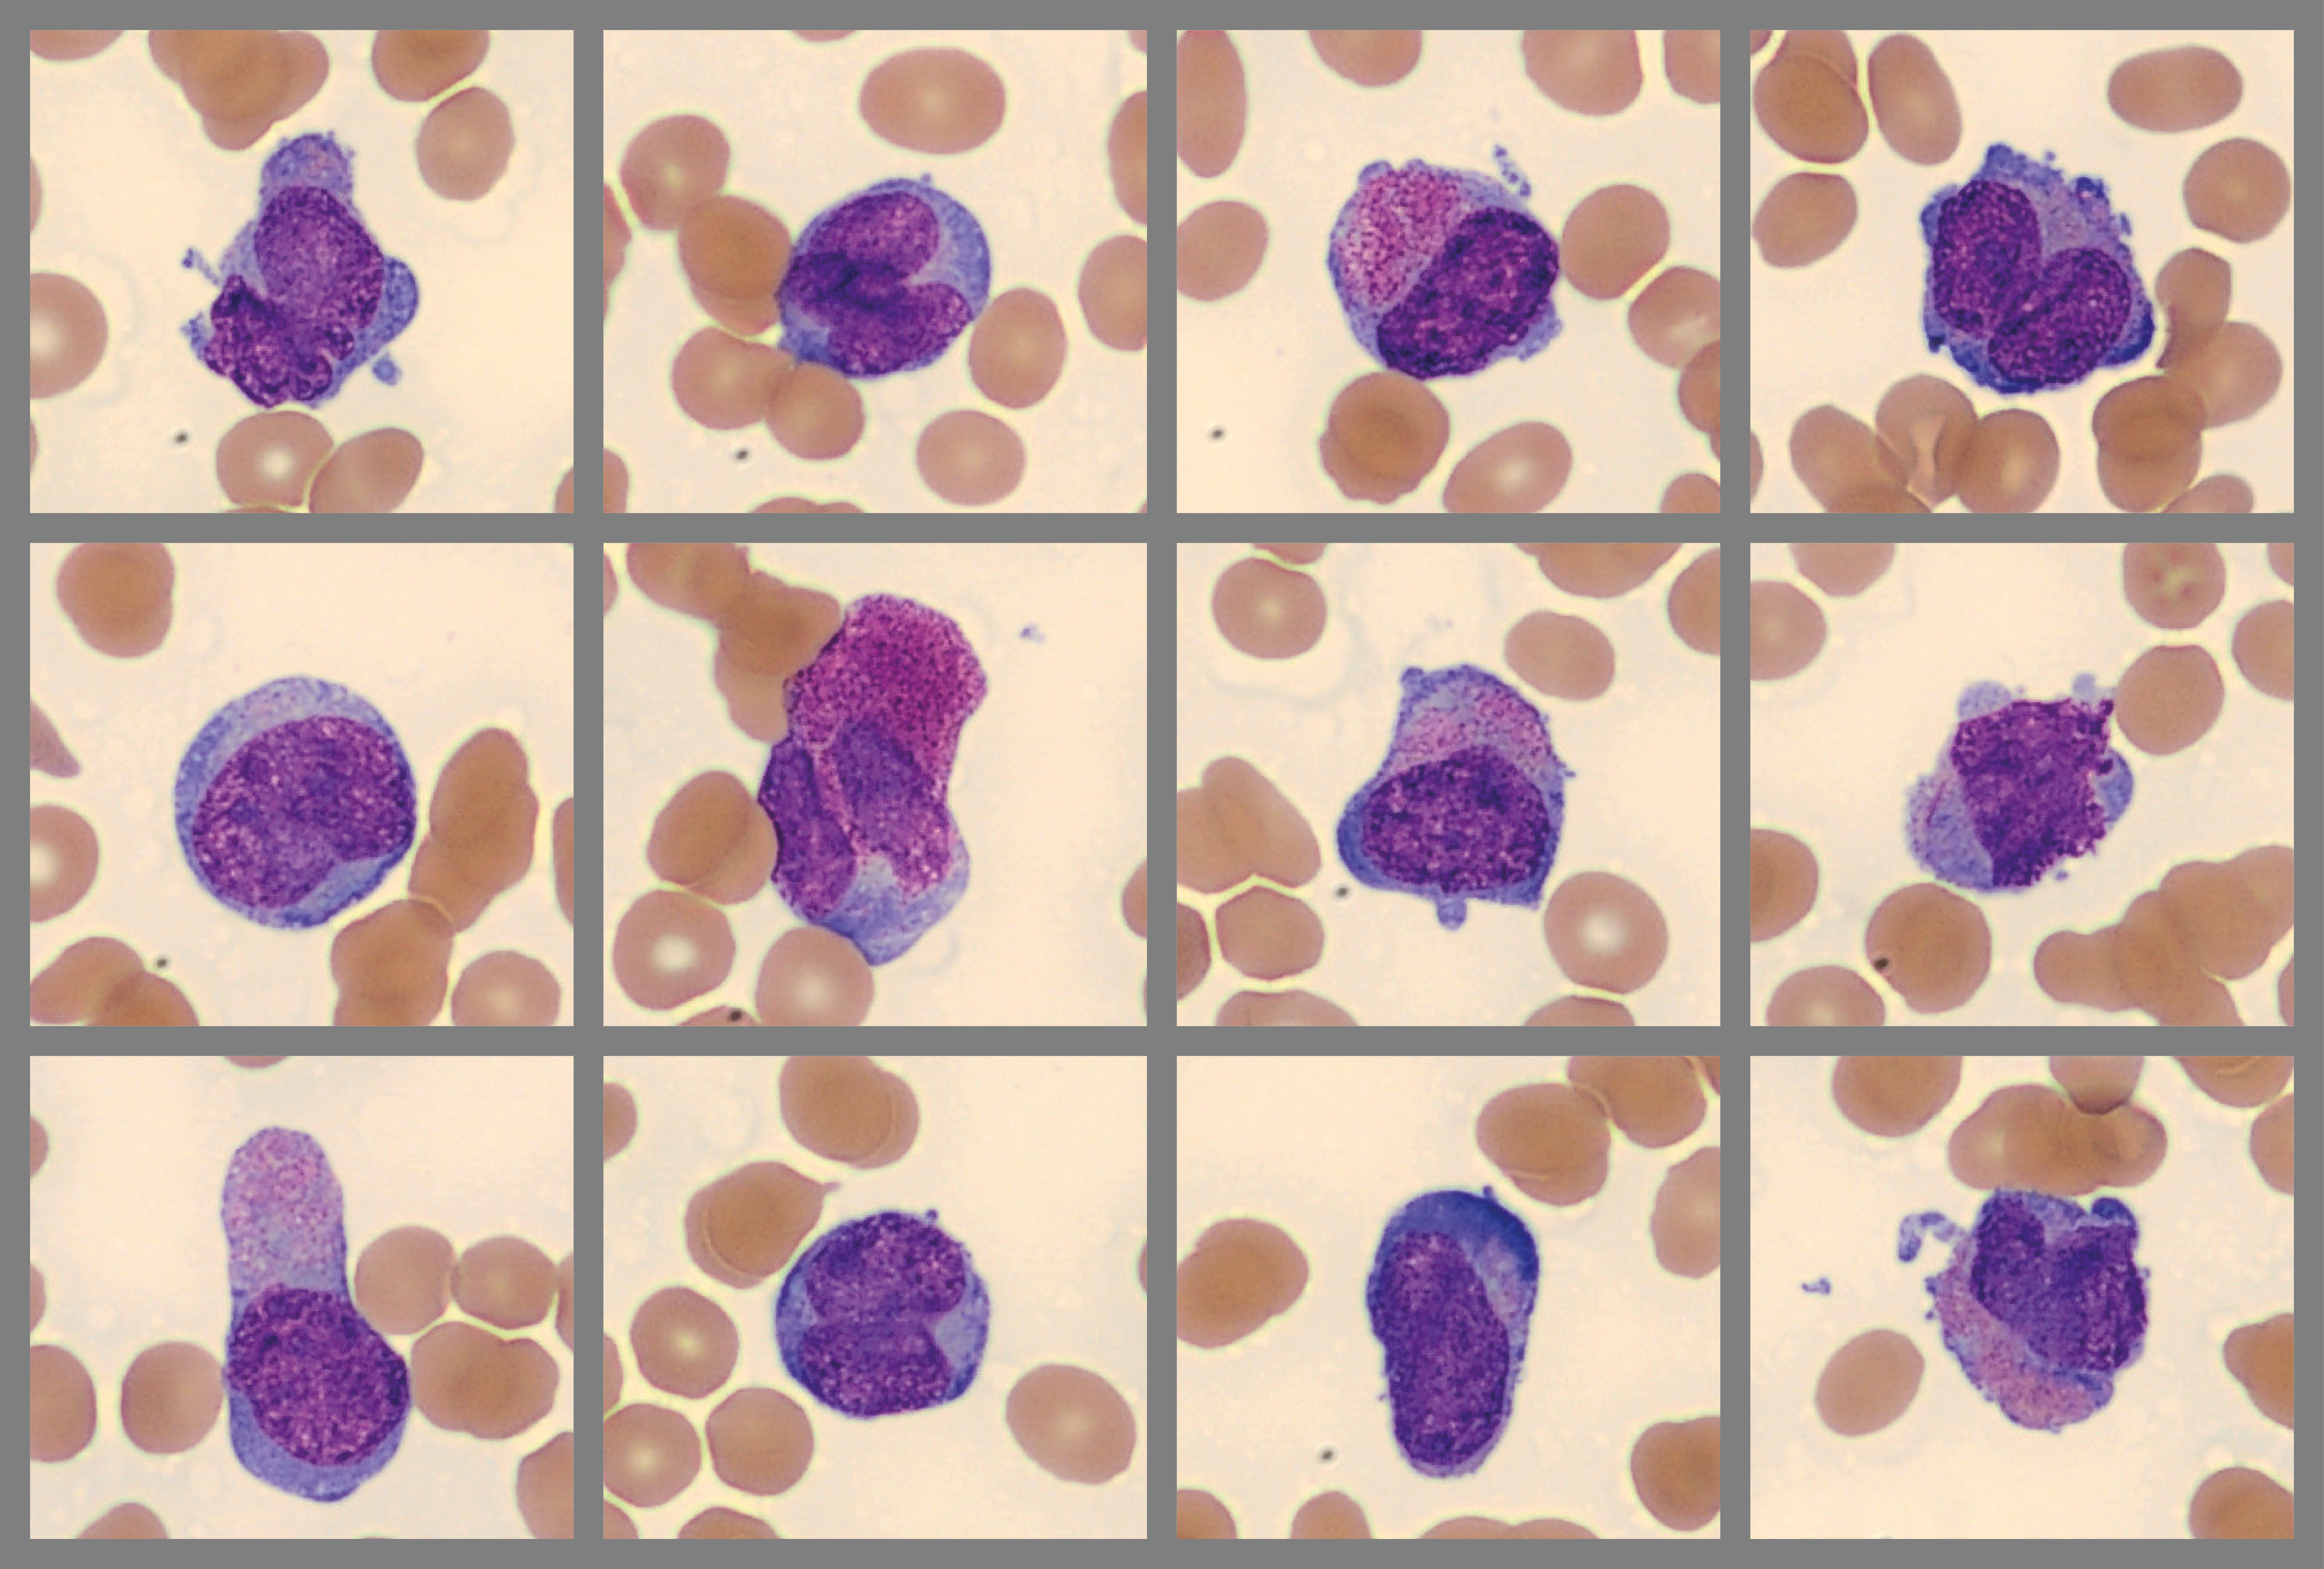 Acute Promyelocytic Leukemia - cells from patient case